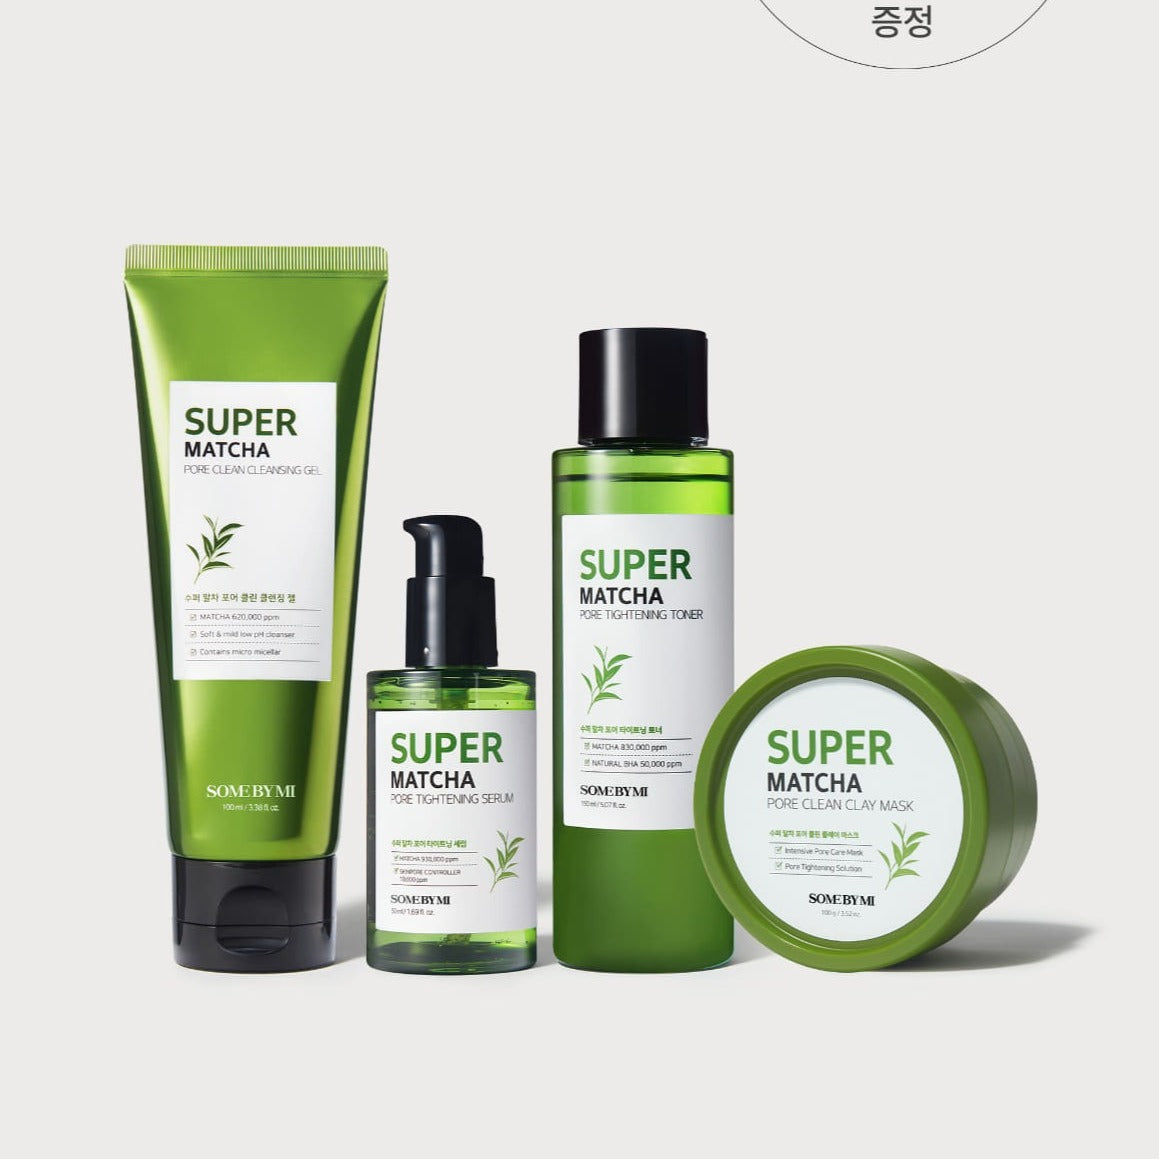 SOME BY MI Super Matcha Pore All Care Set on sales on our Website !